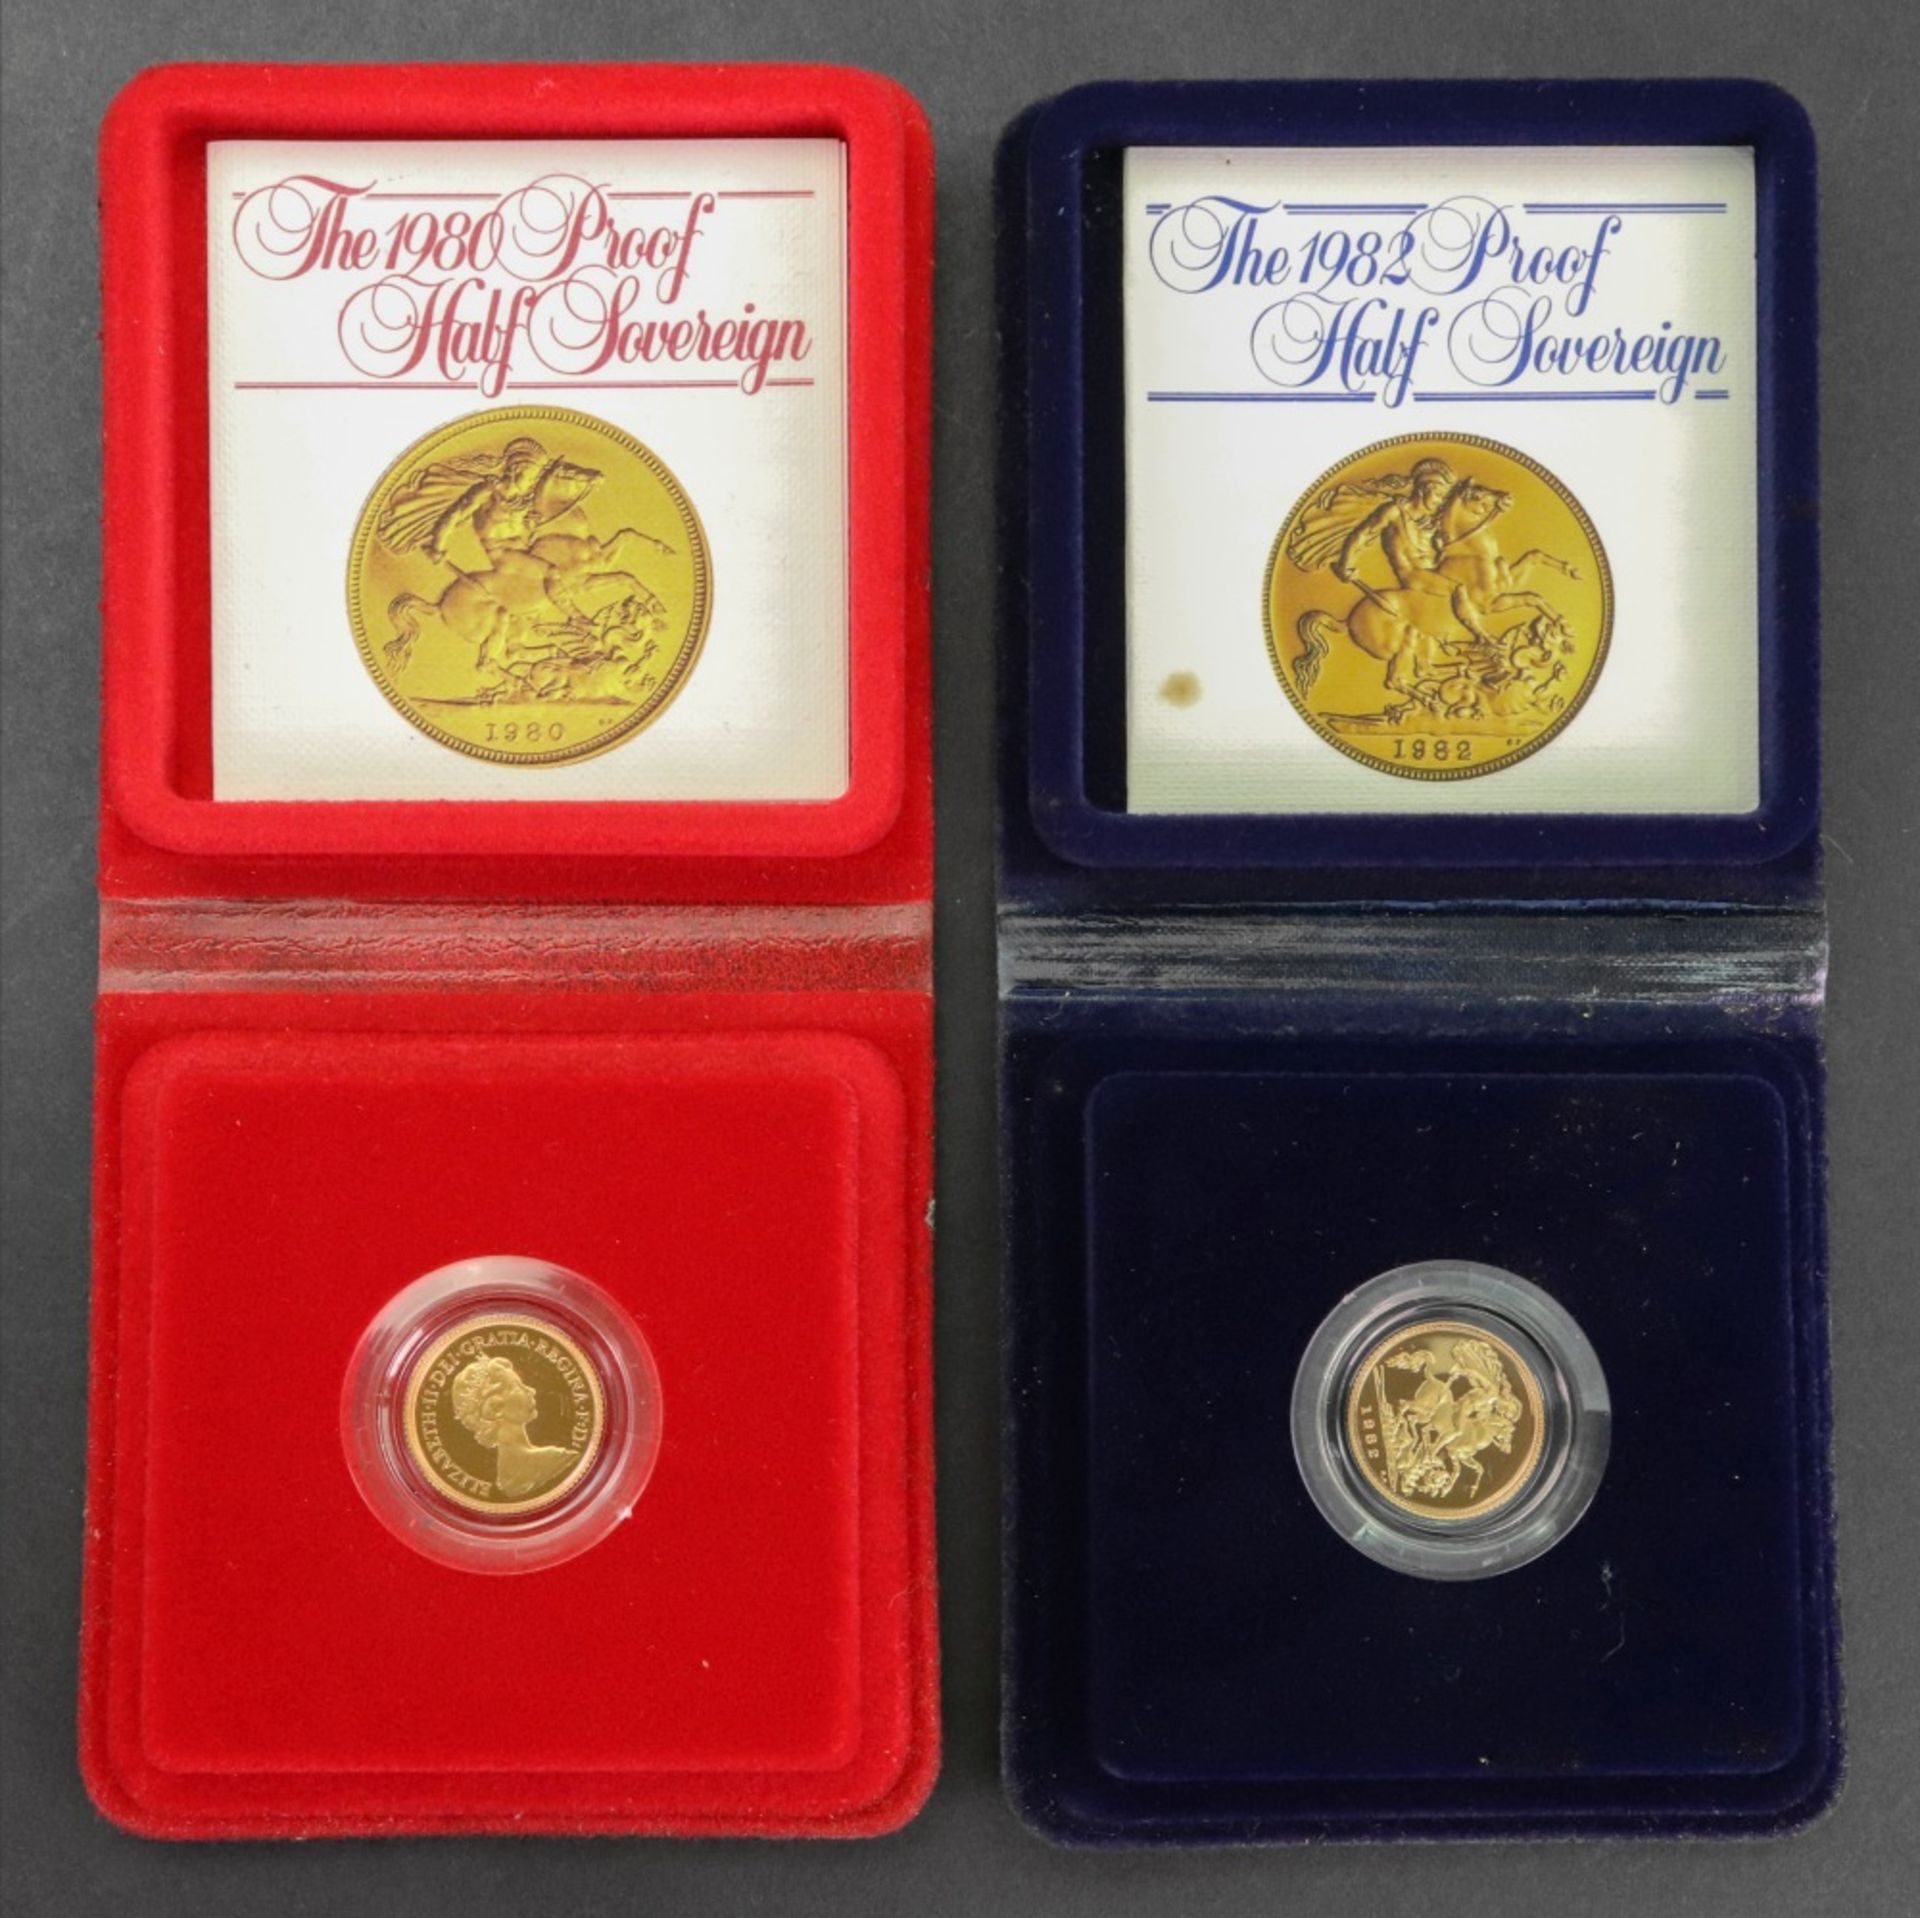 1980 & 1982 Proof half sovereigns, cased (2).